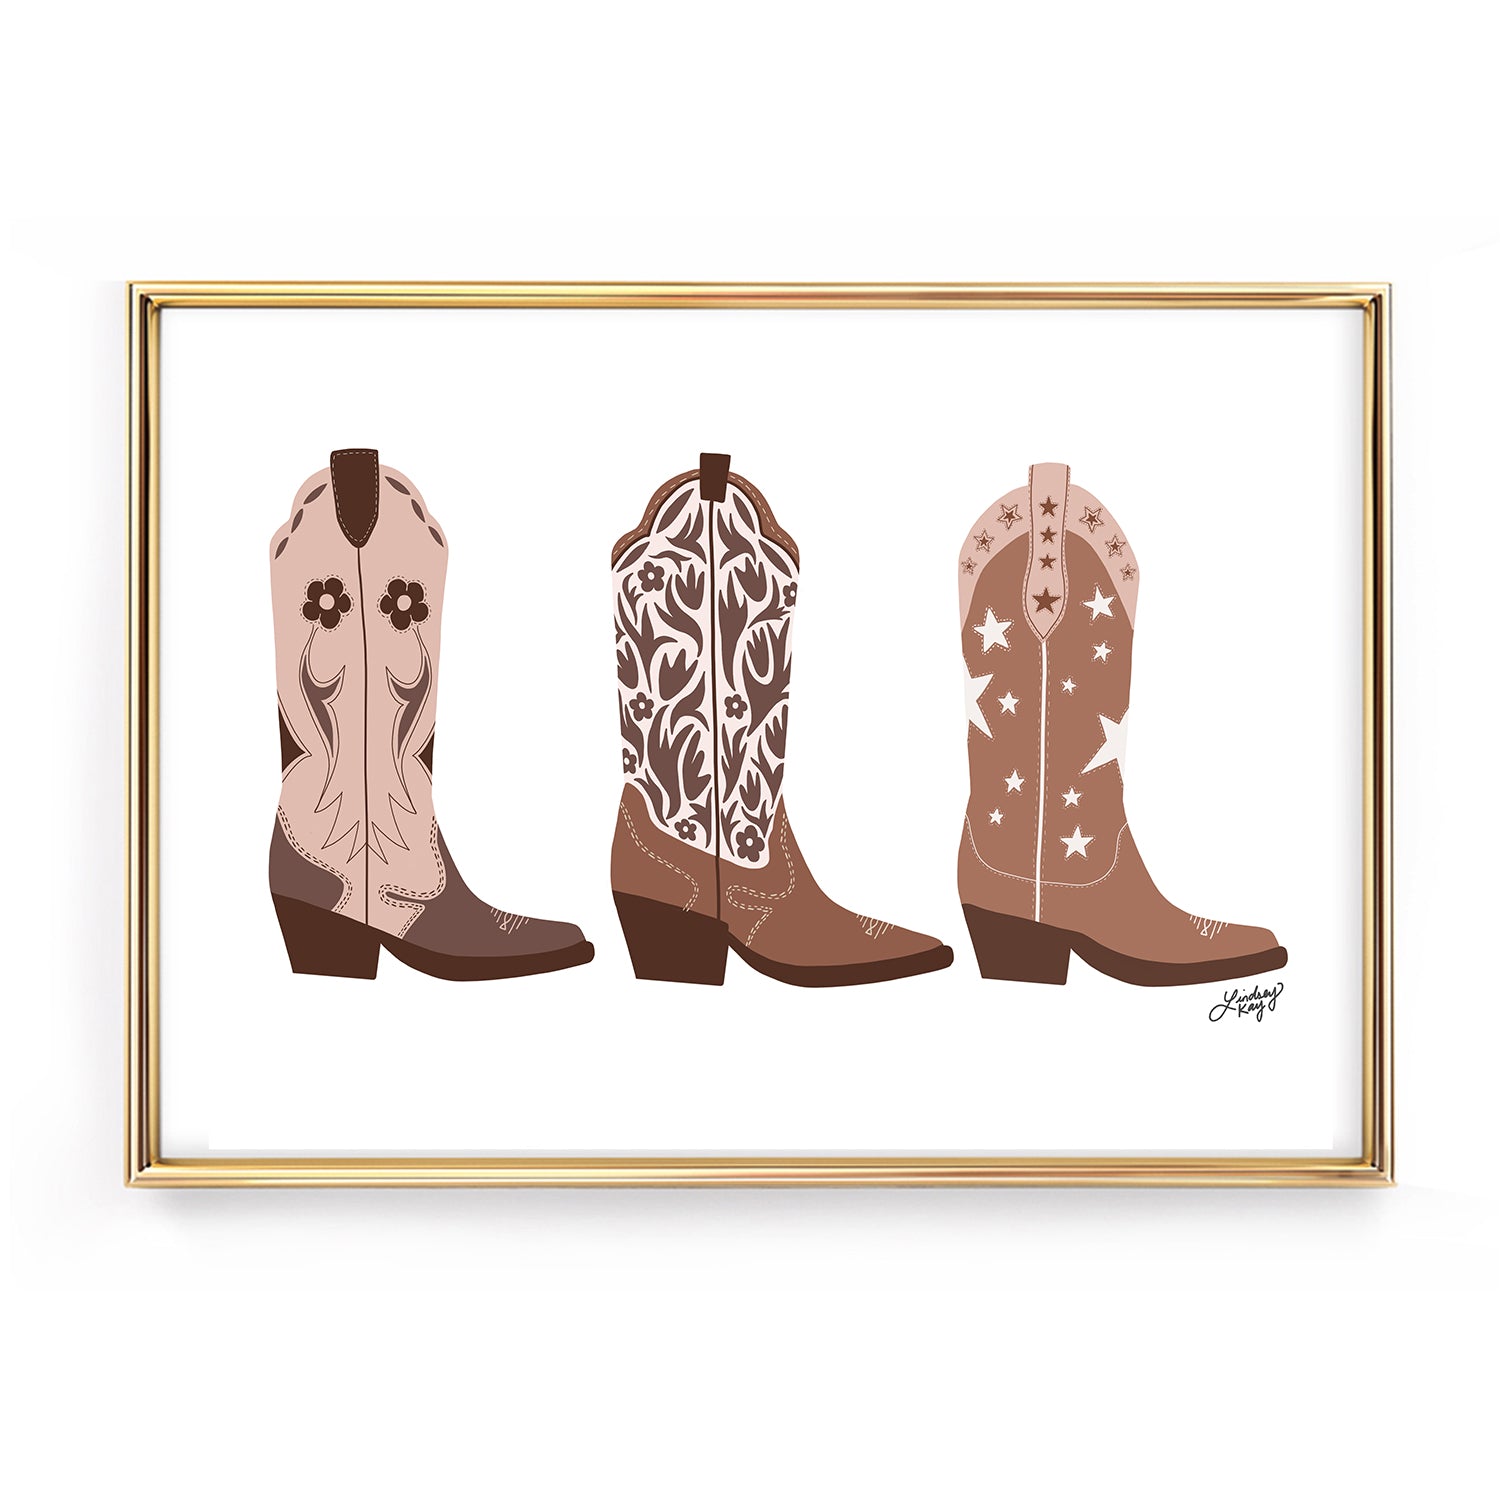 cowboy cowgirl boots tan brown illustration art print poster wall art colorful decor artwork dorm room lindsey kay collective